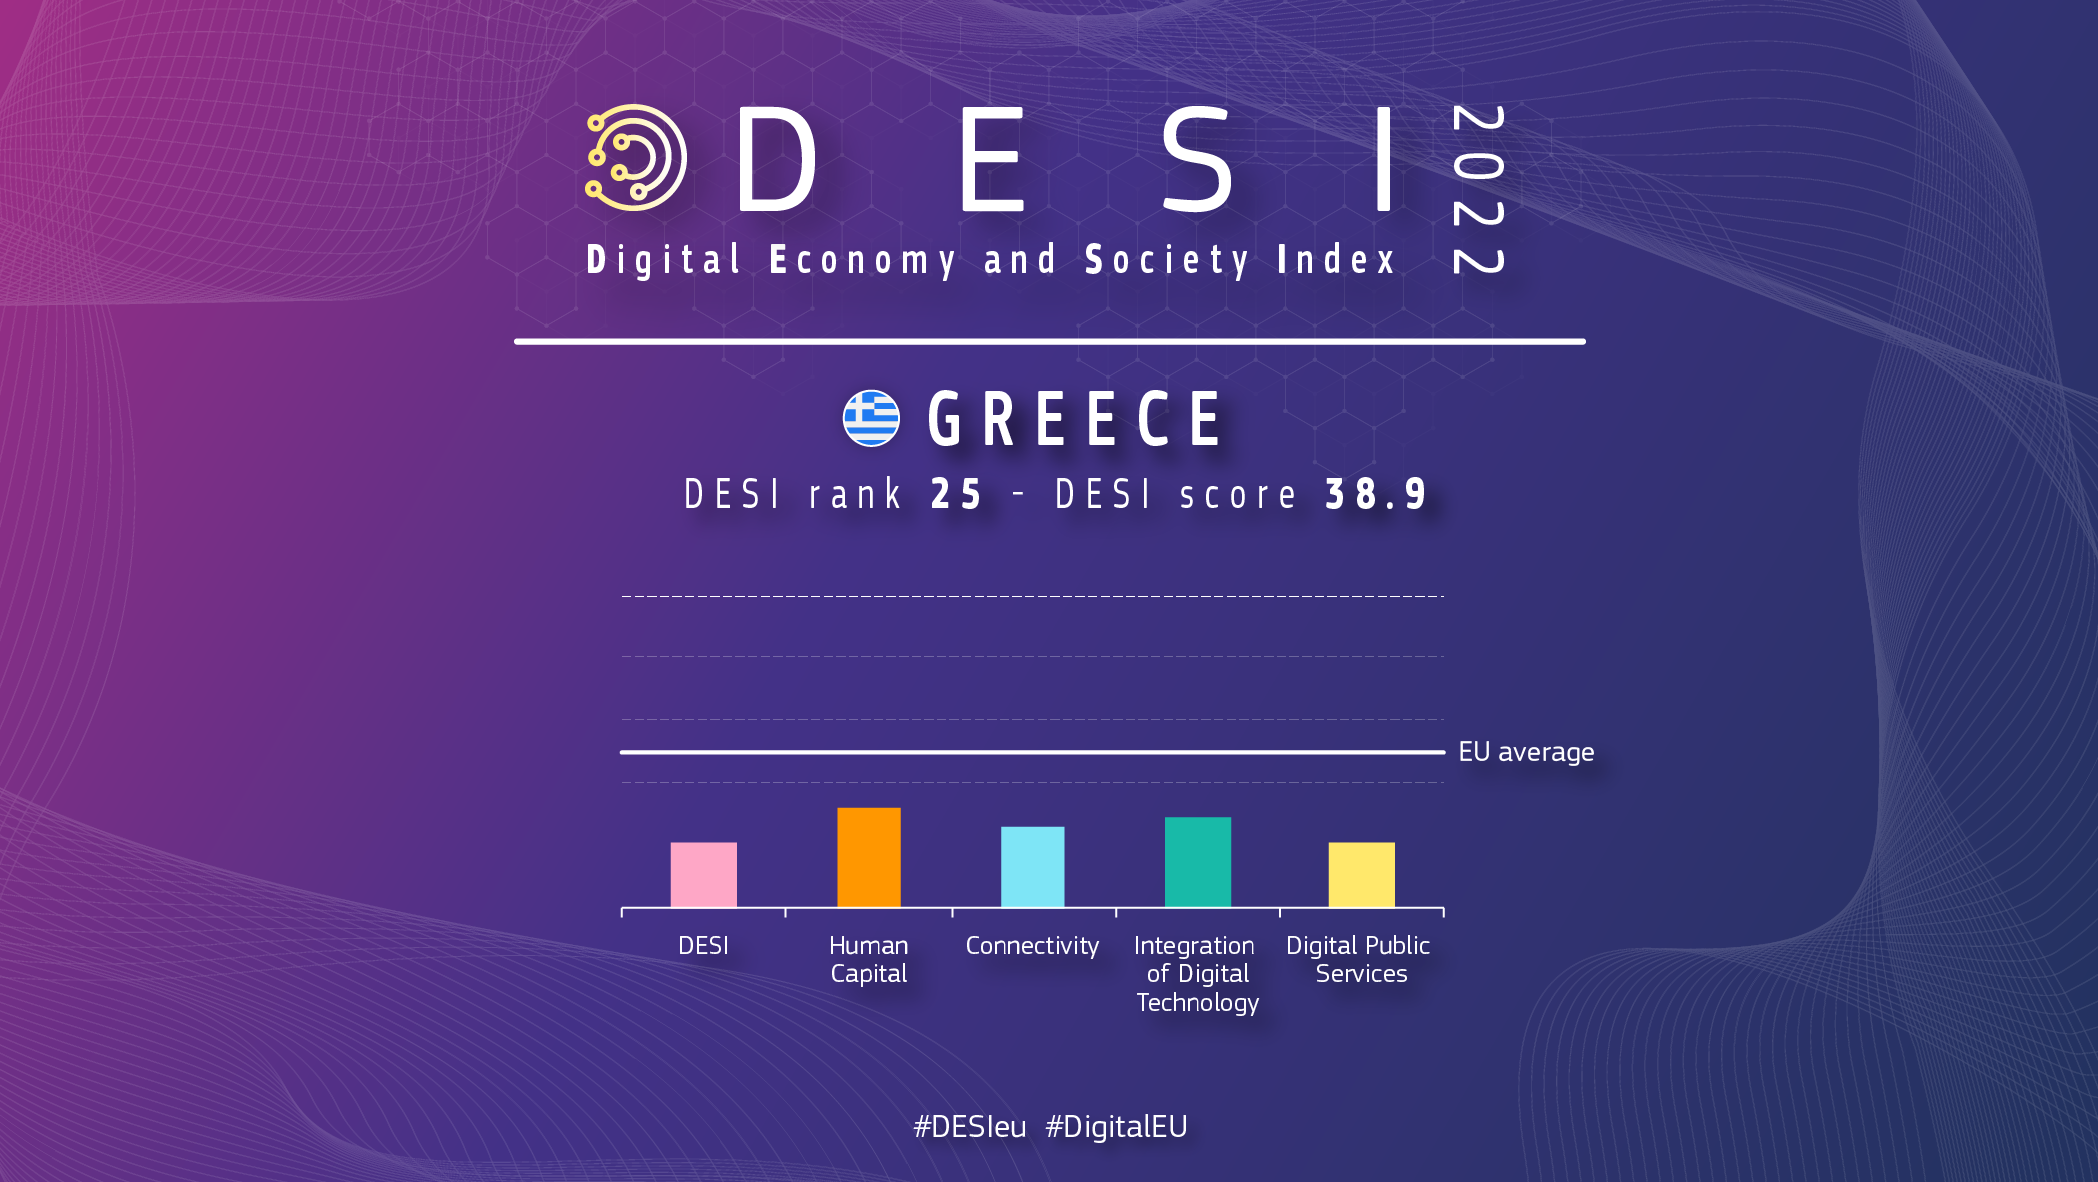 Graphic overview of Greece in DESI showing a ranking of 25 and a score of 38.9